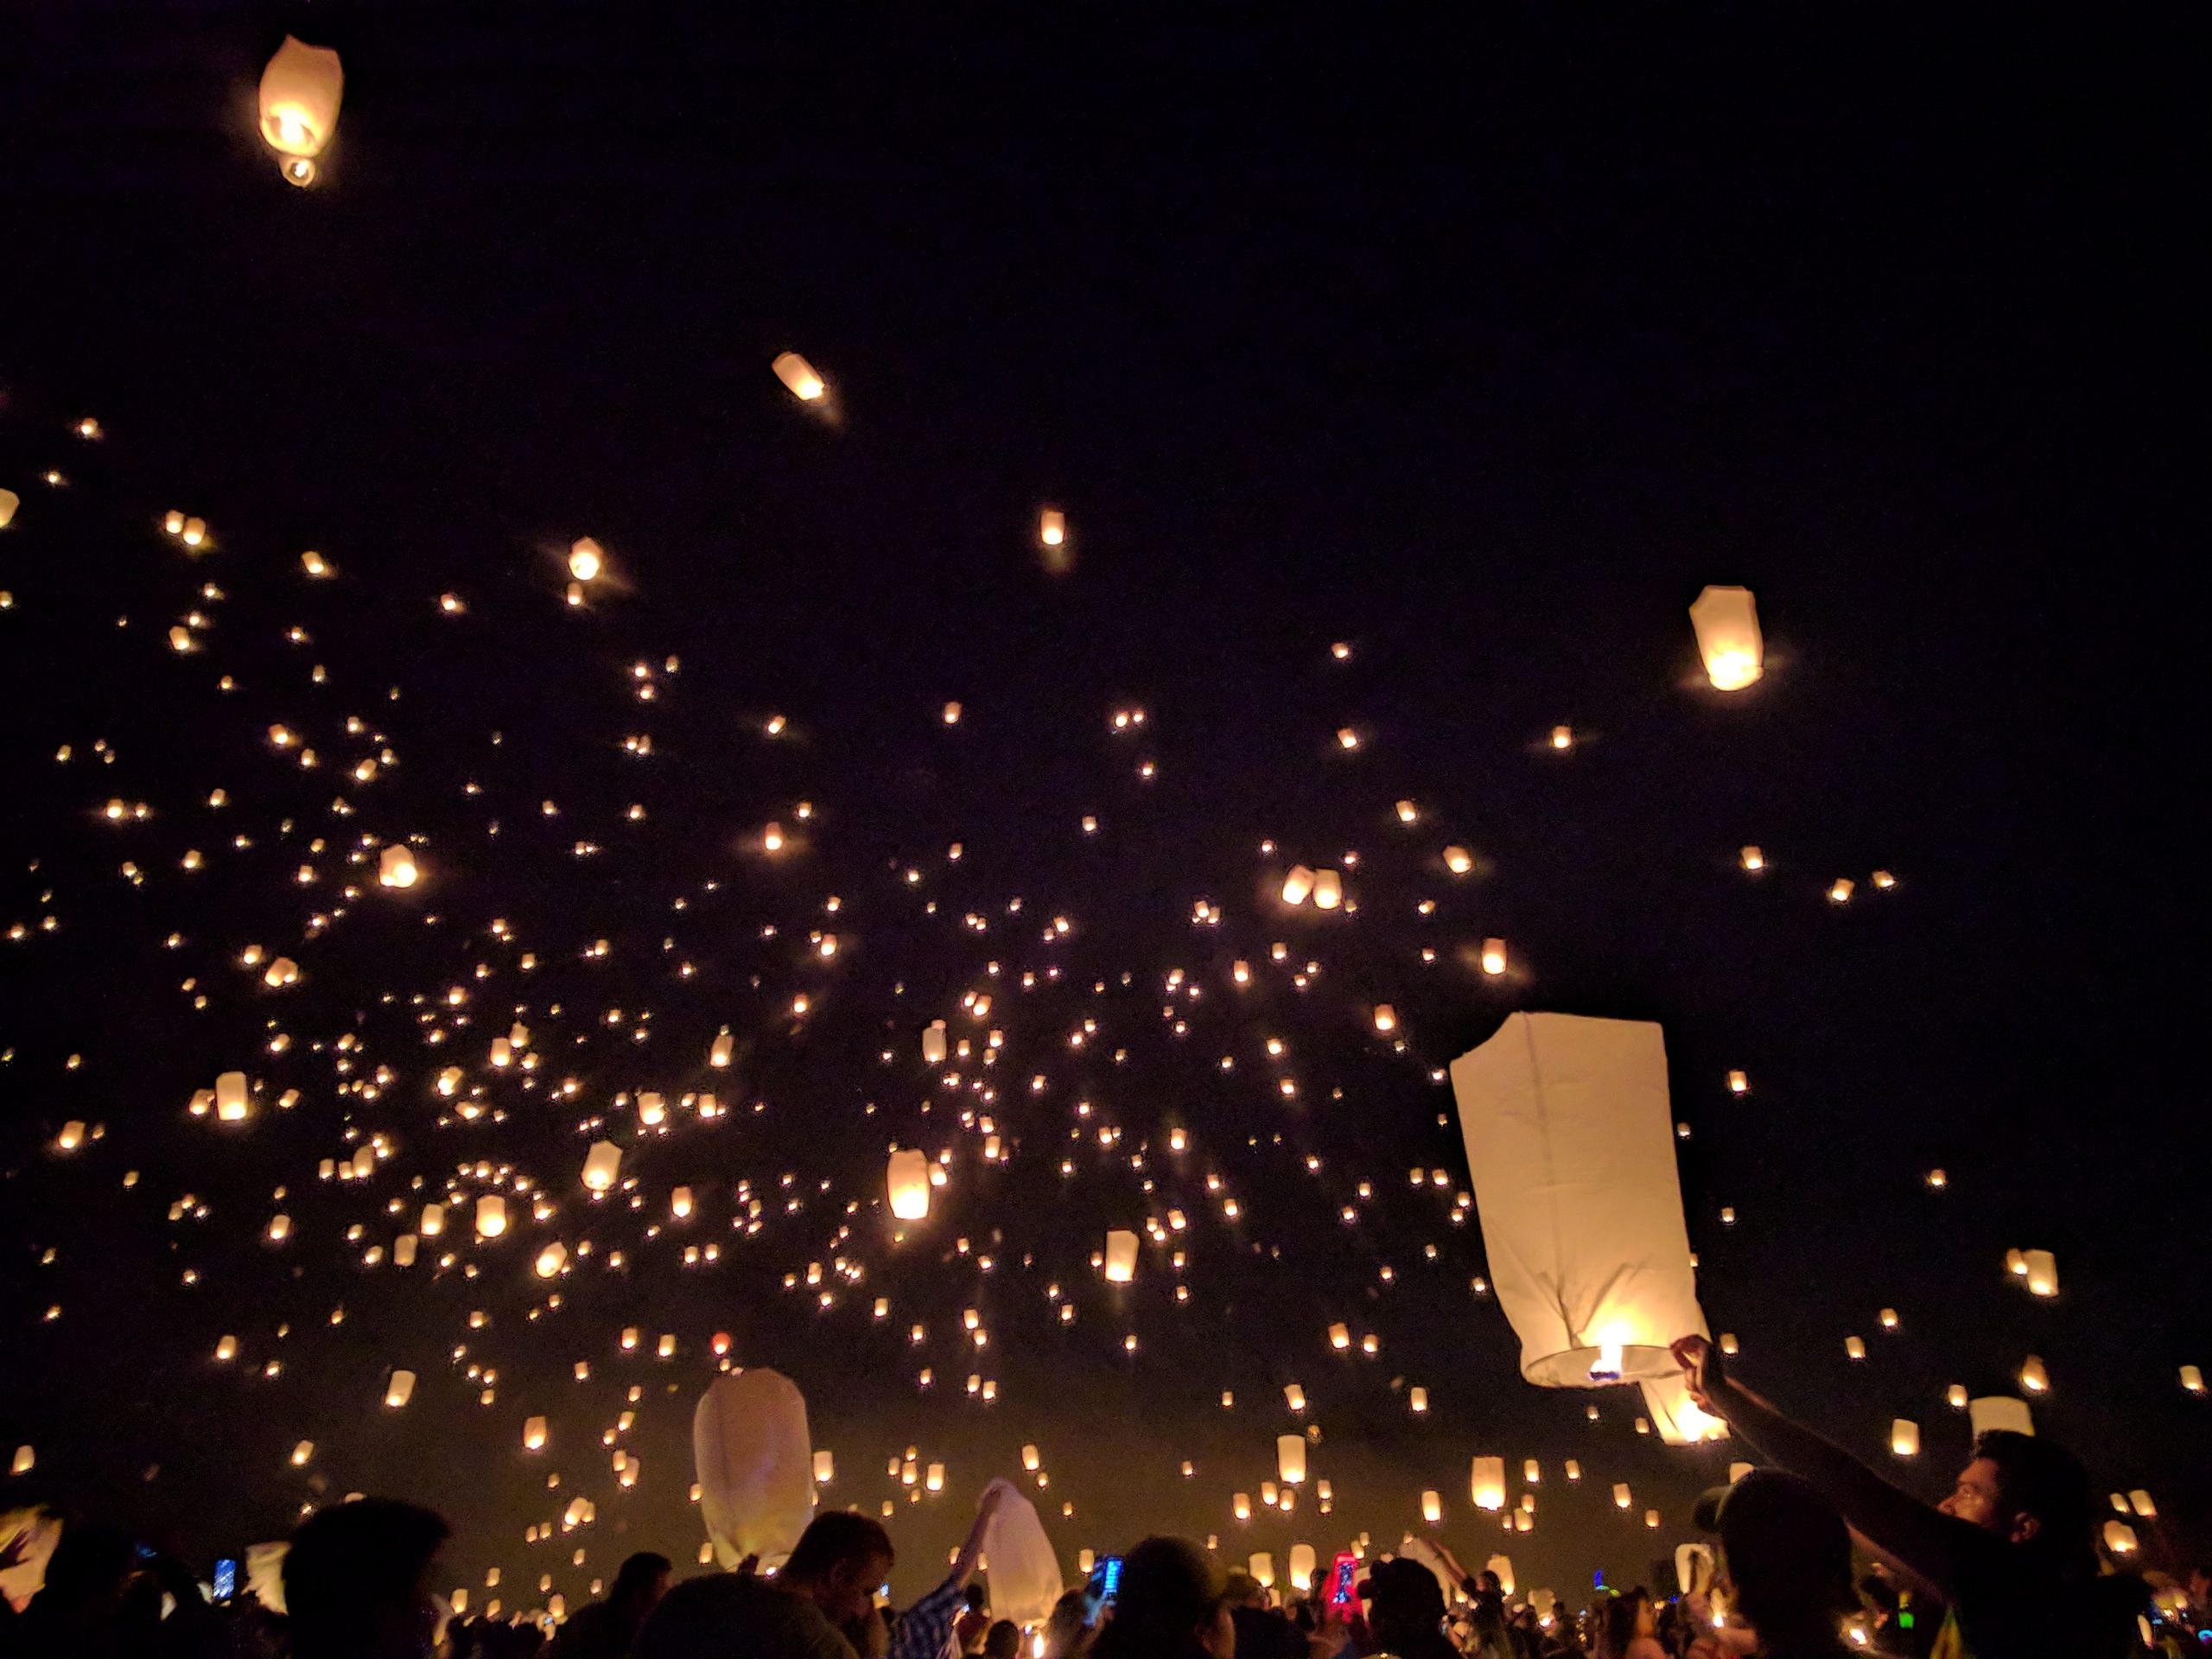 Sky lanterns lighting up a night sky. Image credit: Lacey Day via Pexels